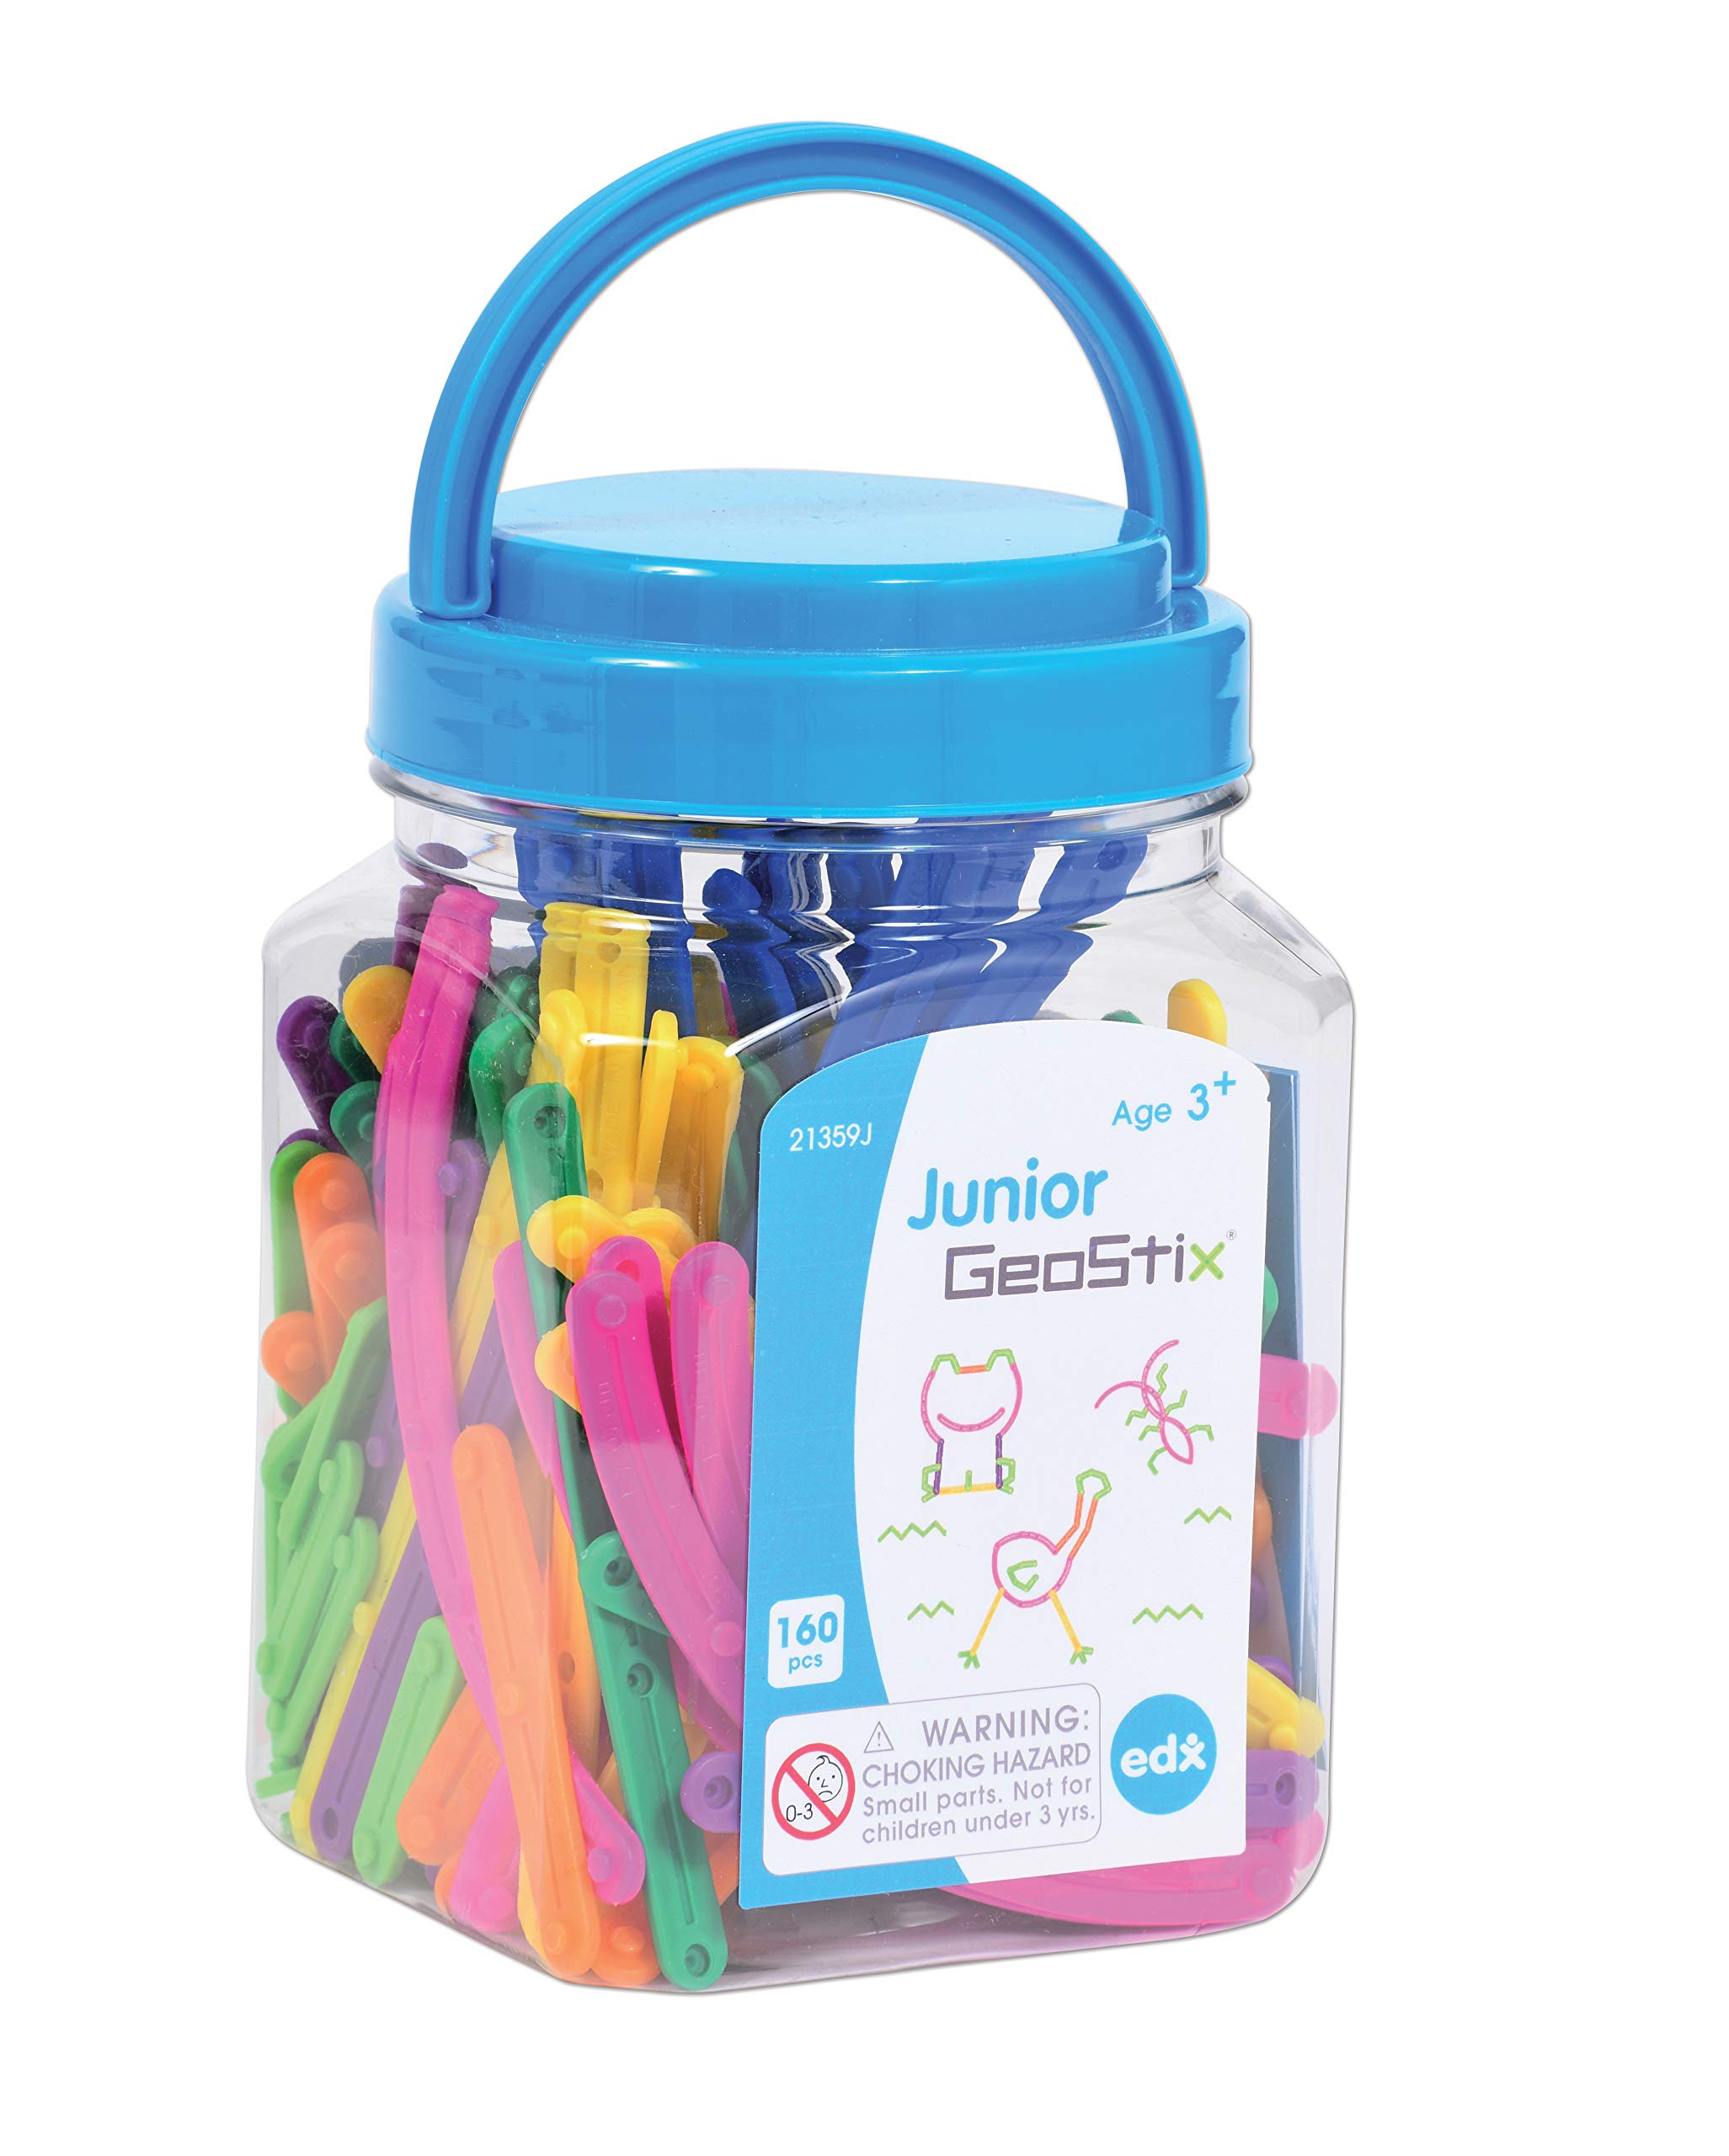 edxeducation - 21359 Junior GeoStix - Mini Jar Set of 160 - Geometric Construction Sticks - Build 2D Shapes and Pictures - Math Manipulative for Kids - Ages 3+